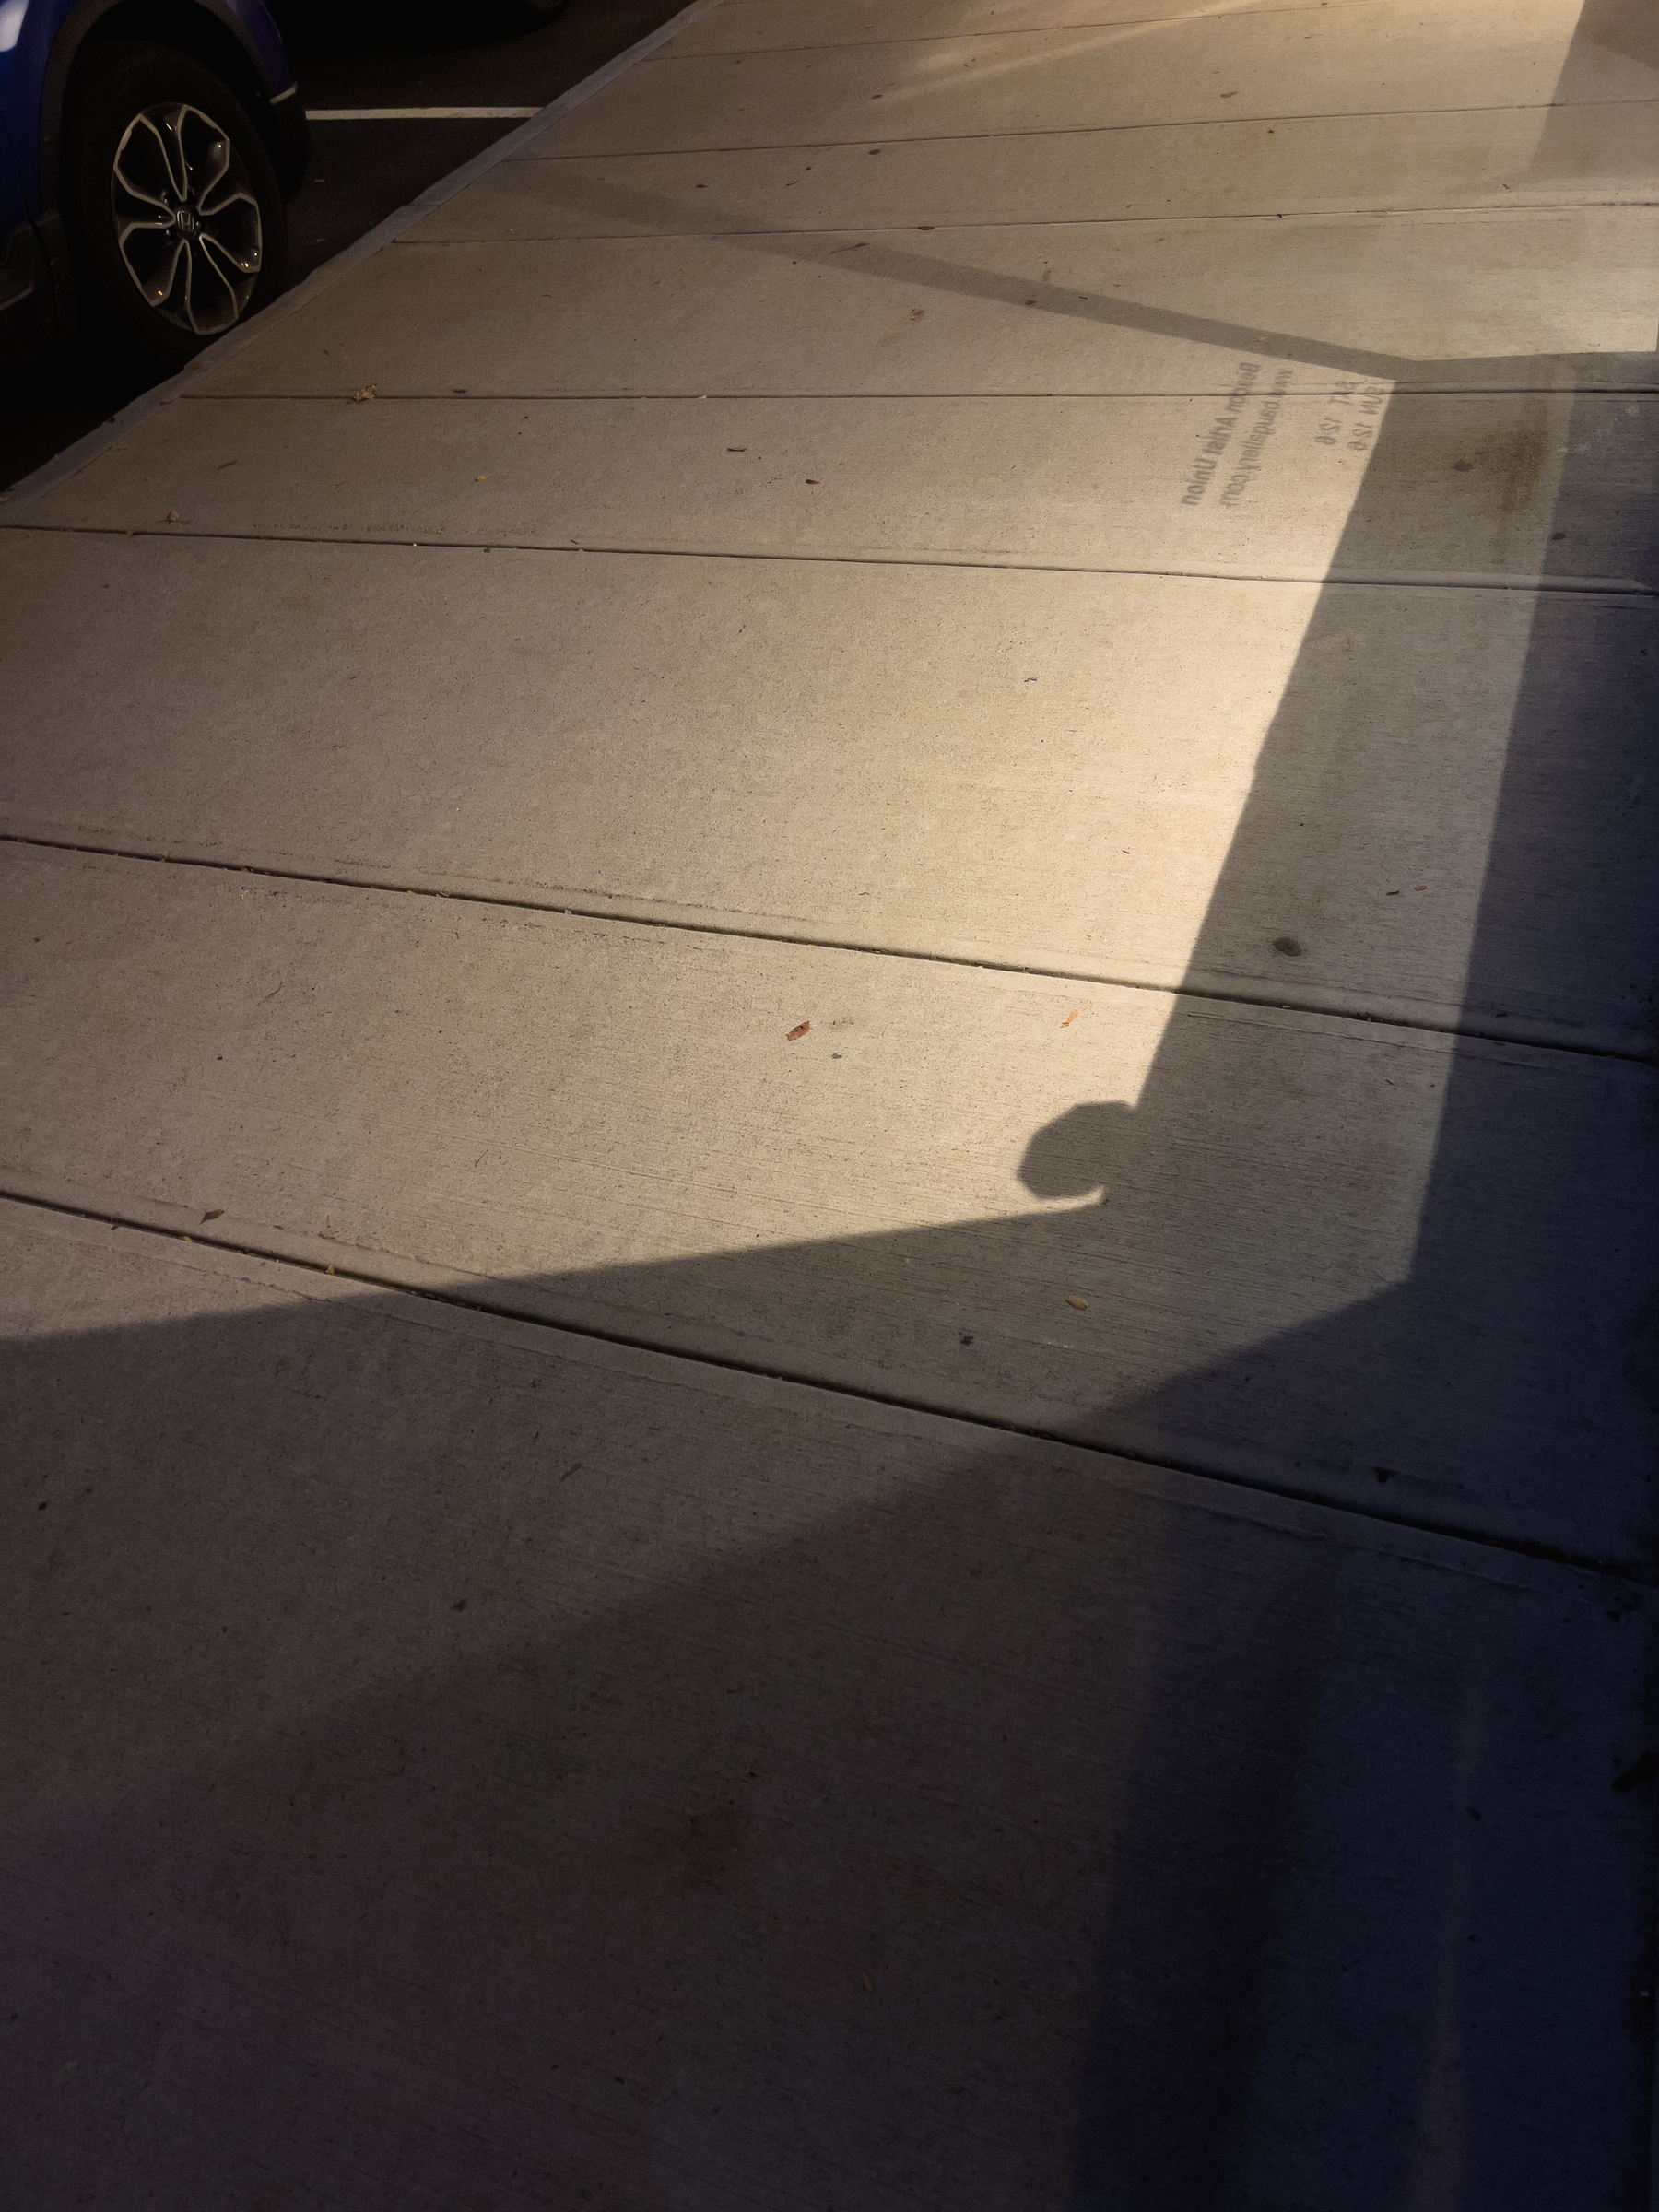 Light cast onto pavement from storefront.